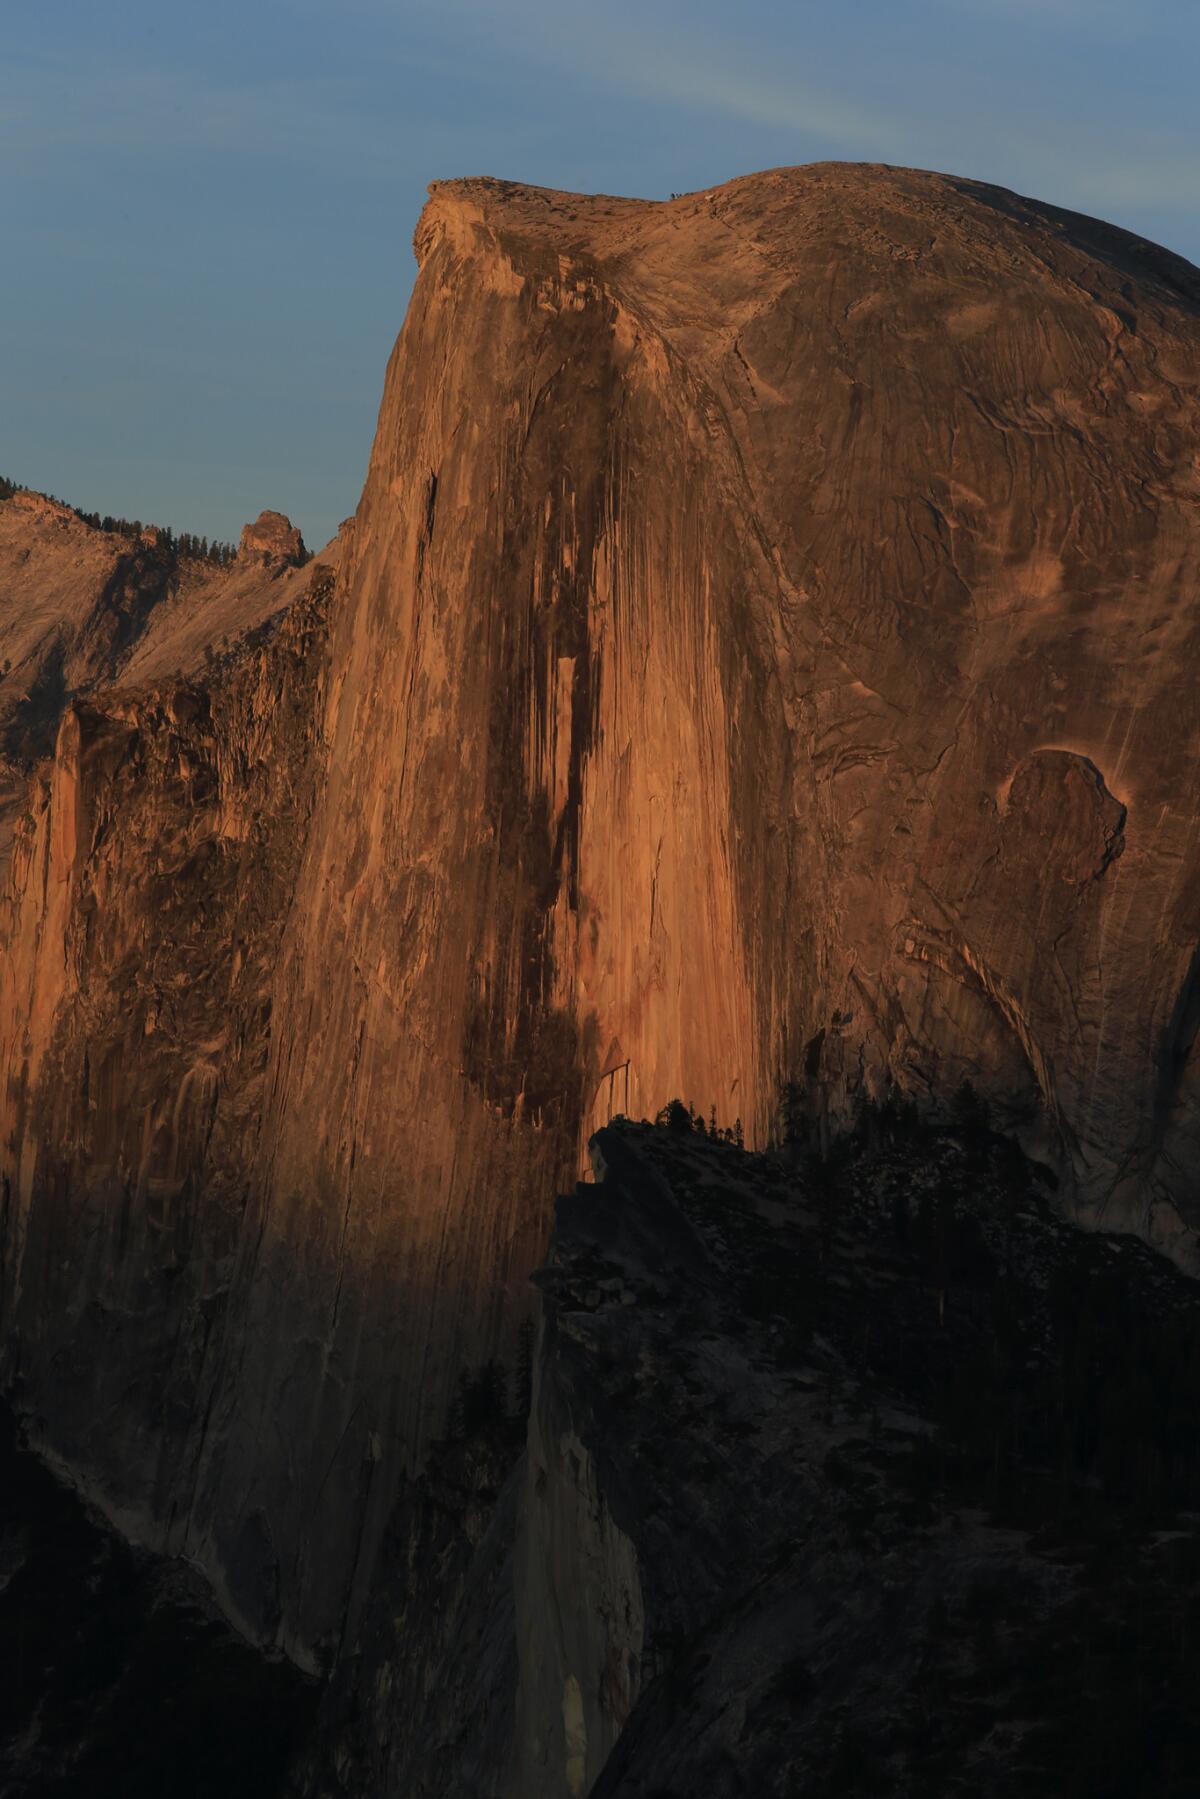 Half Dome glows in the setting sun in this view from Glacier Point in Yosemite National Park.